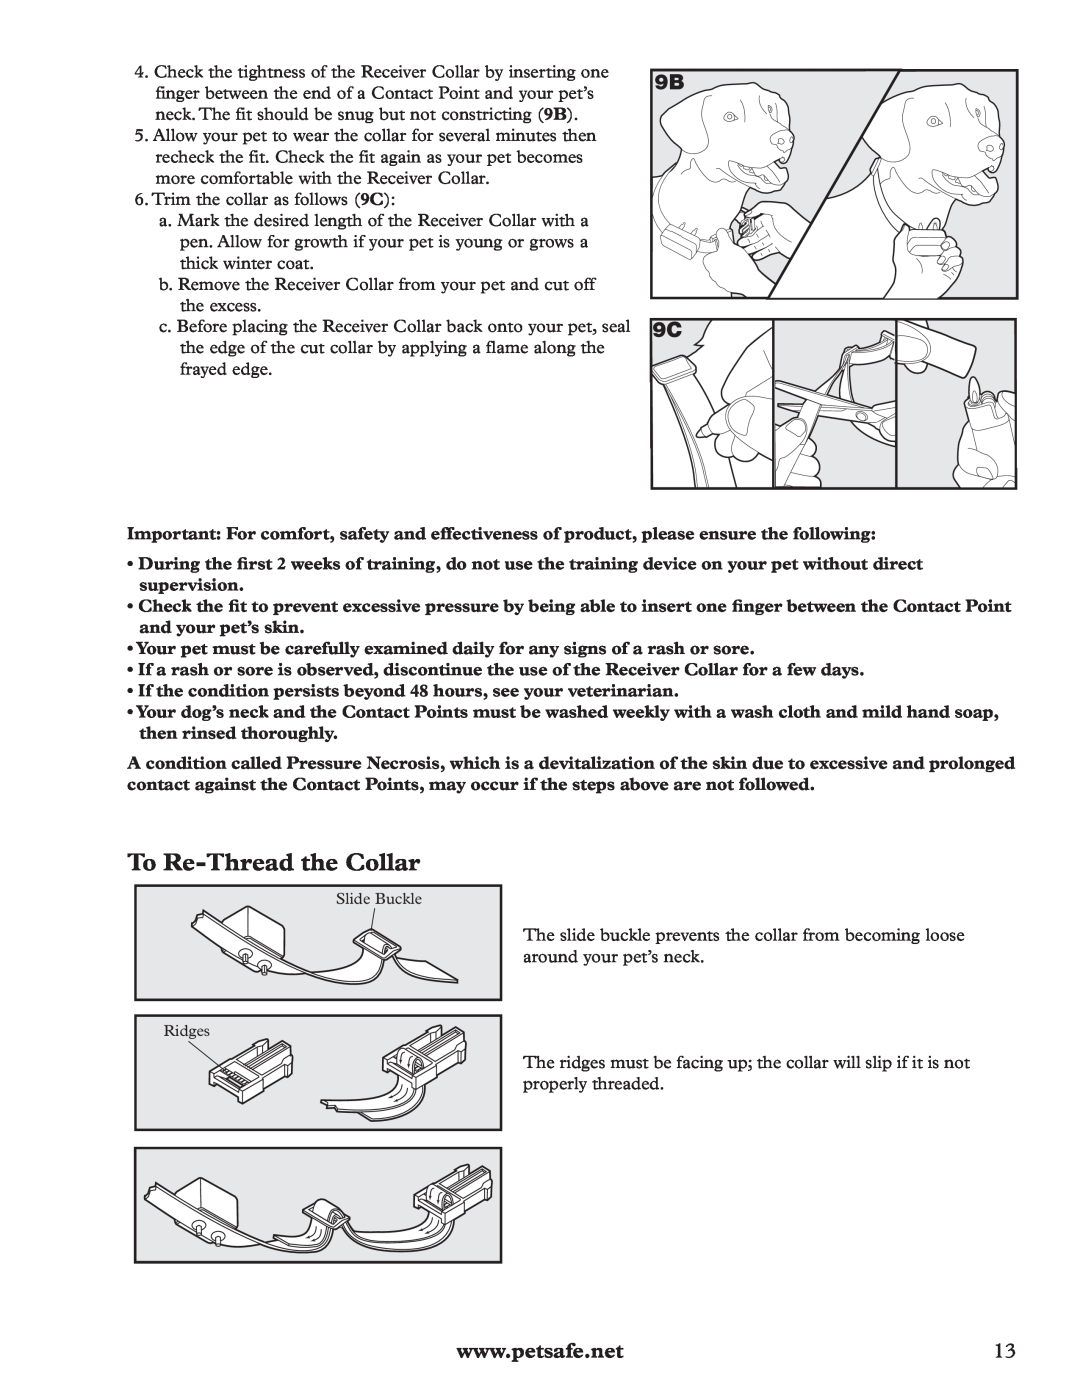 Petsafe RFA-200 manual To Re-Thread the Collar, 9B 9C, If the condition persists beyond 48 hours, see your veterinarian 